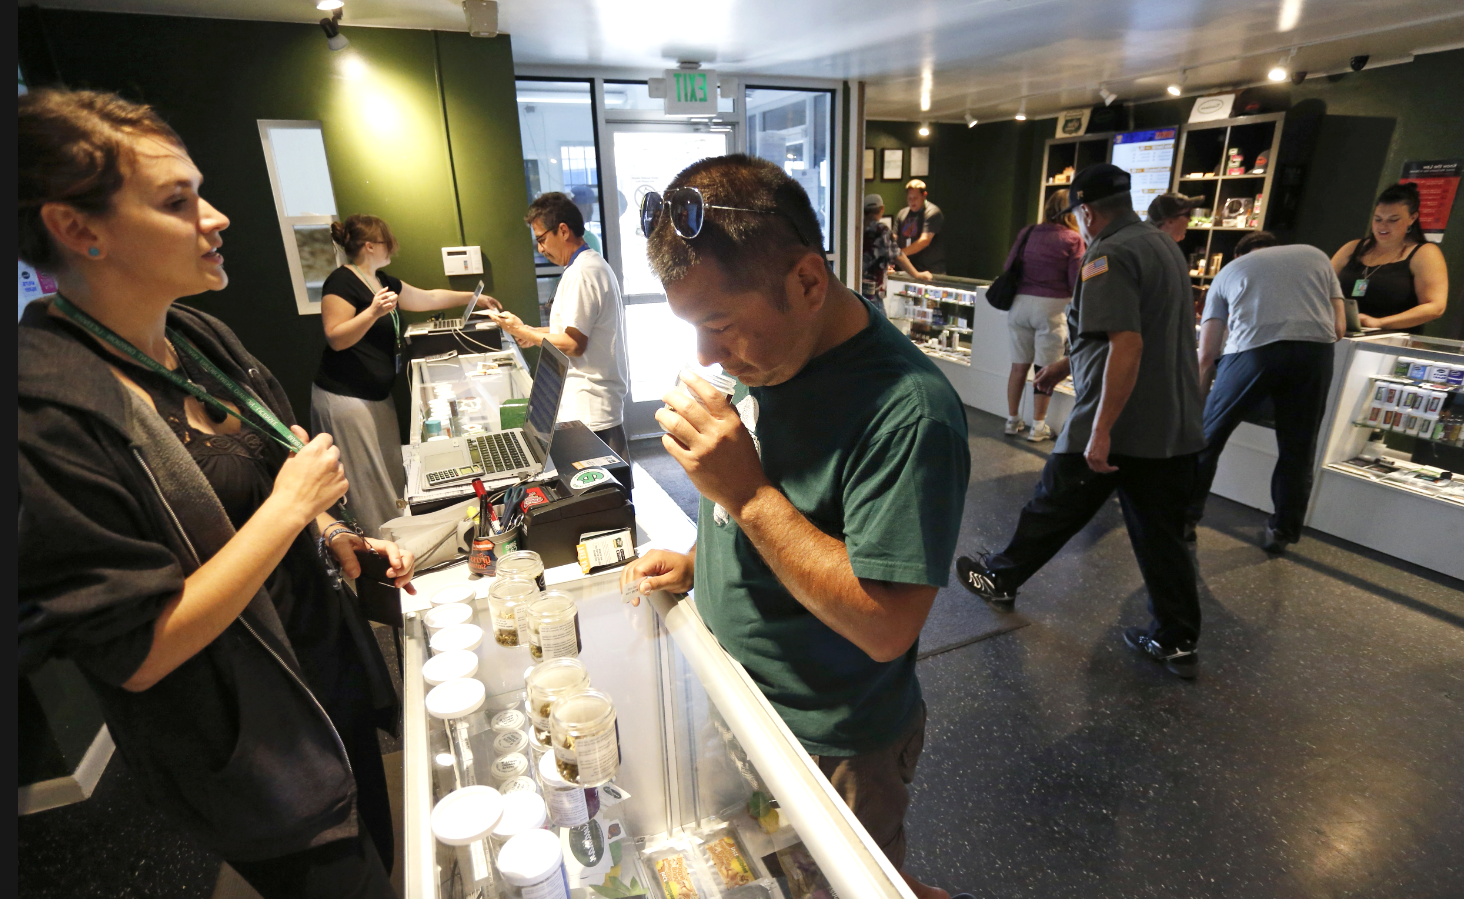 Looking to buy cannabis without a medical marijuana card and long lines? - Local Records Office